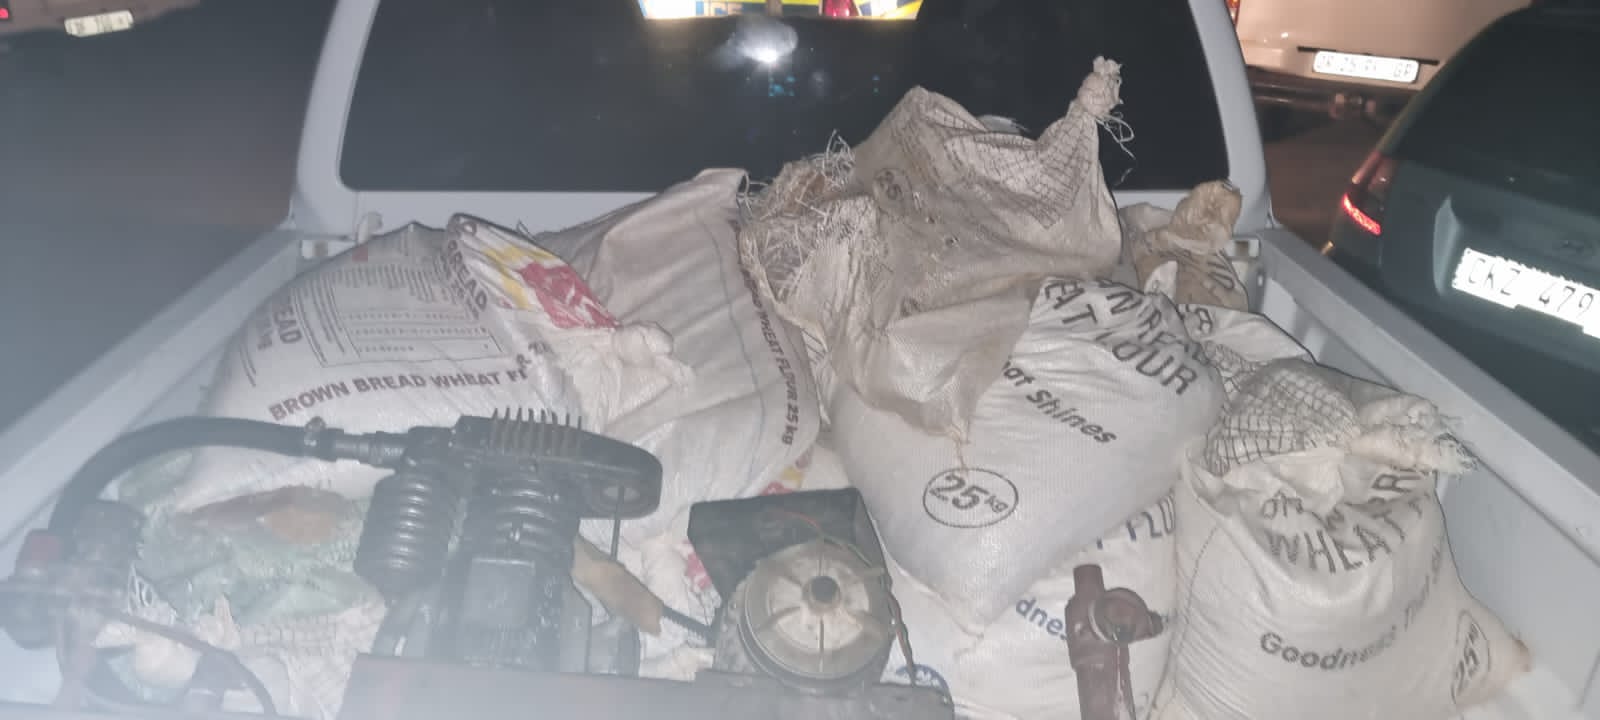 Tip-off leads to arrest of five suspects, precious stones and abandoned vehicle recovered